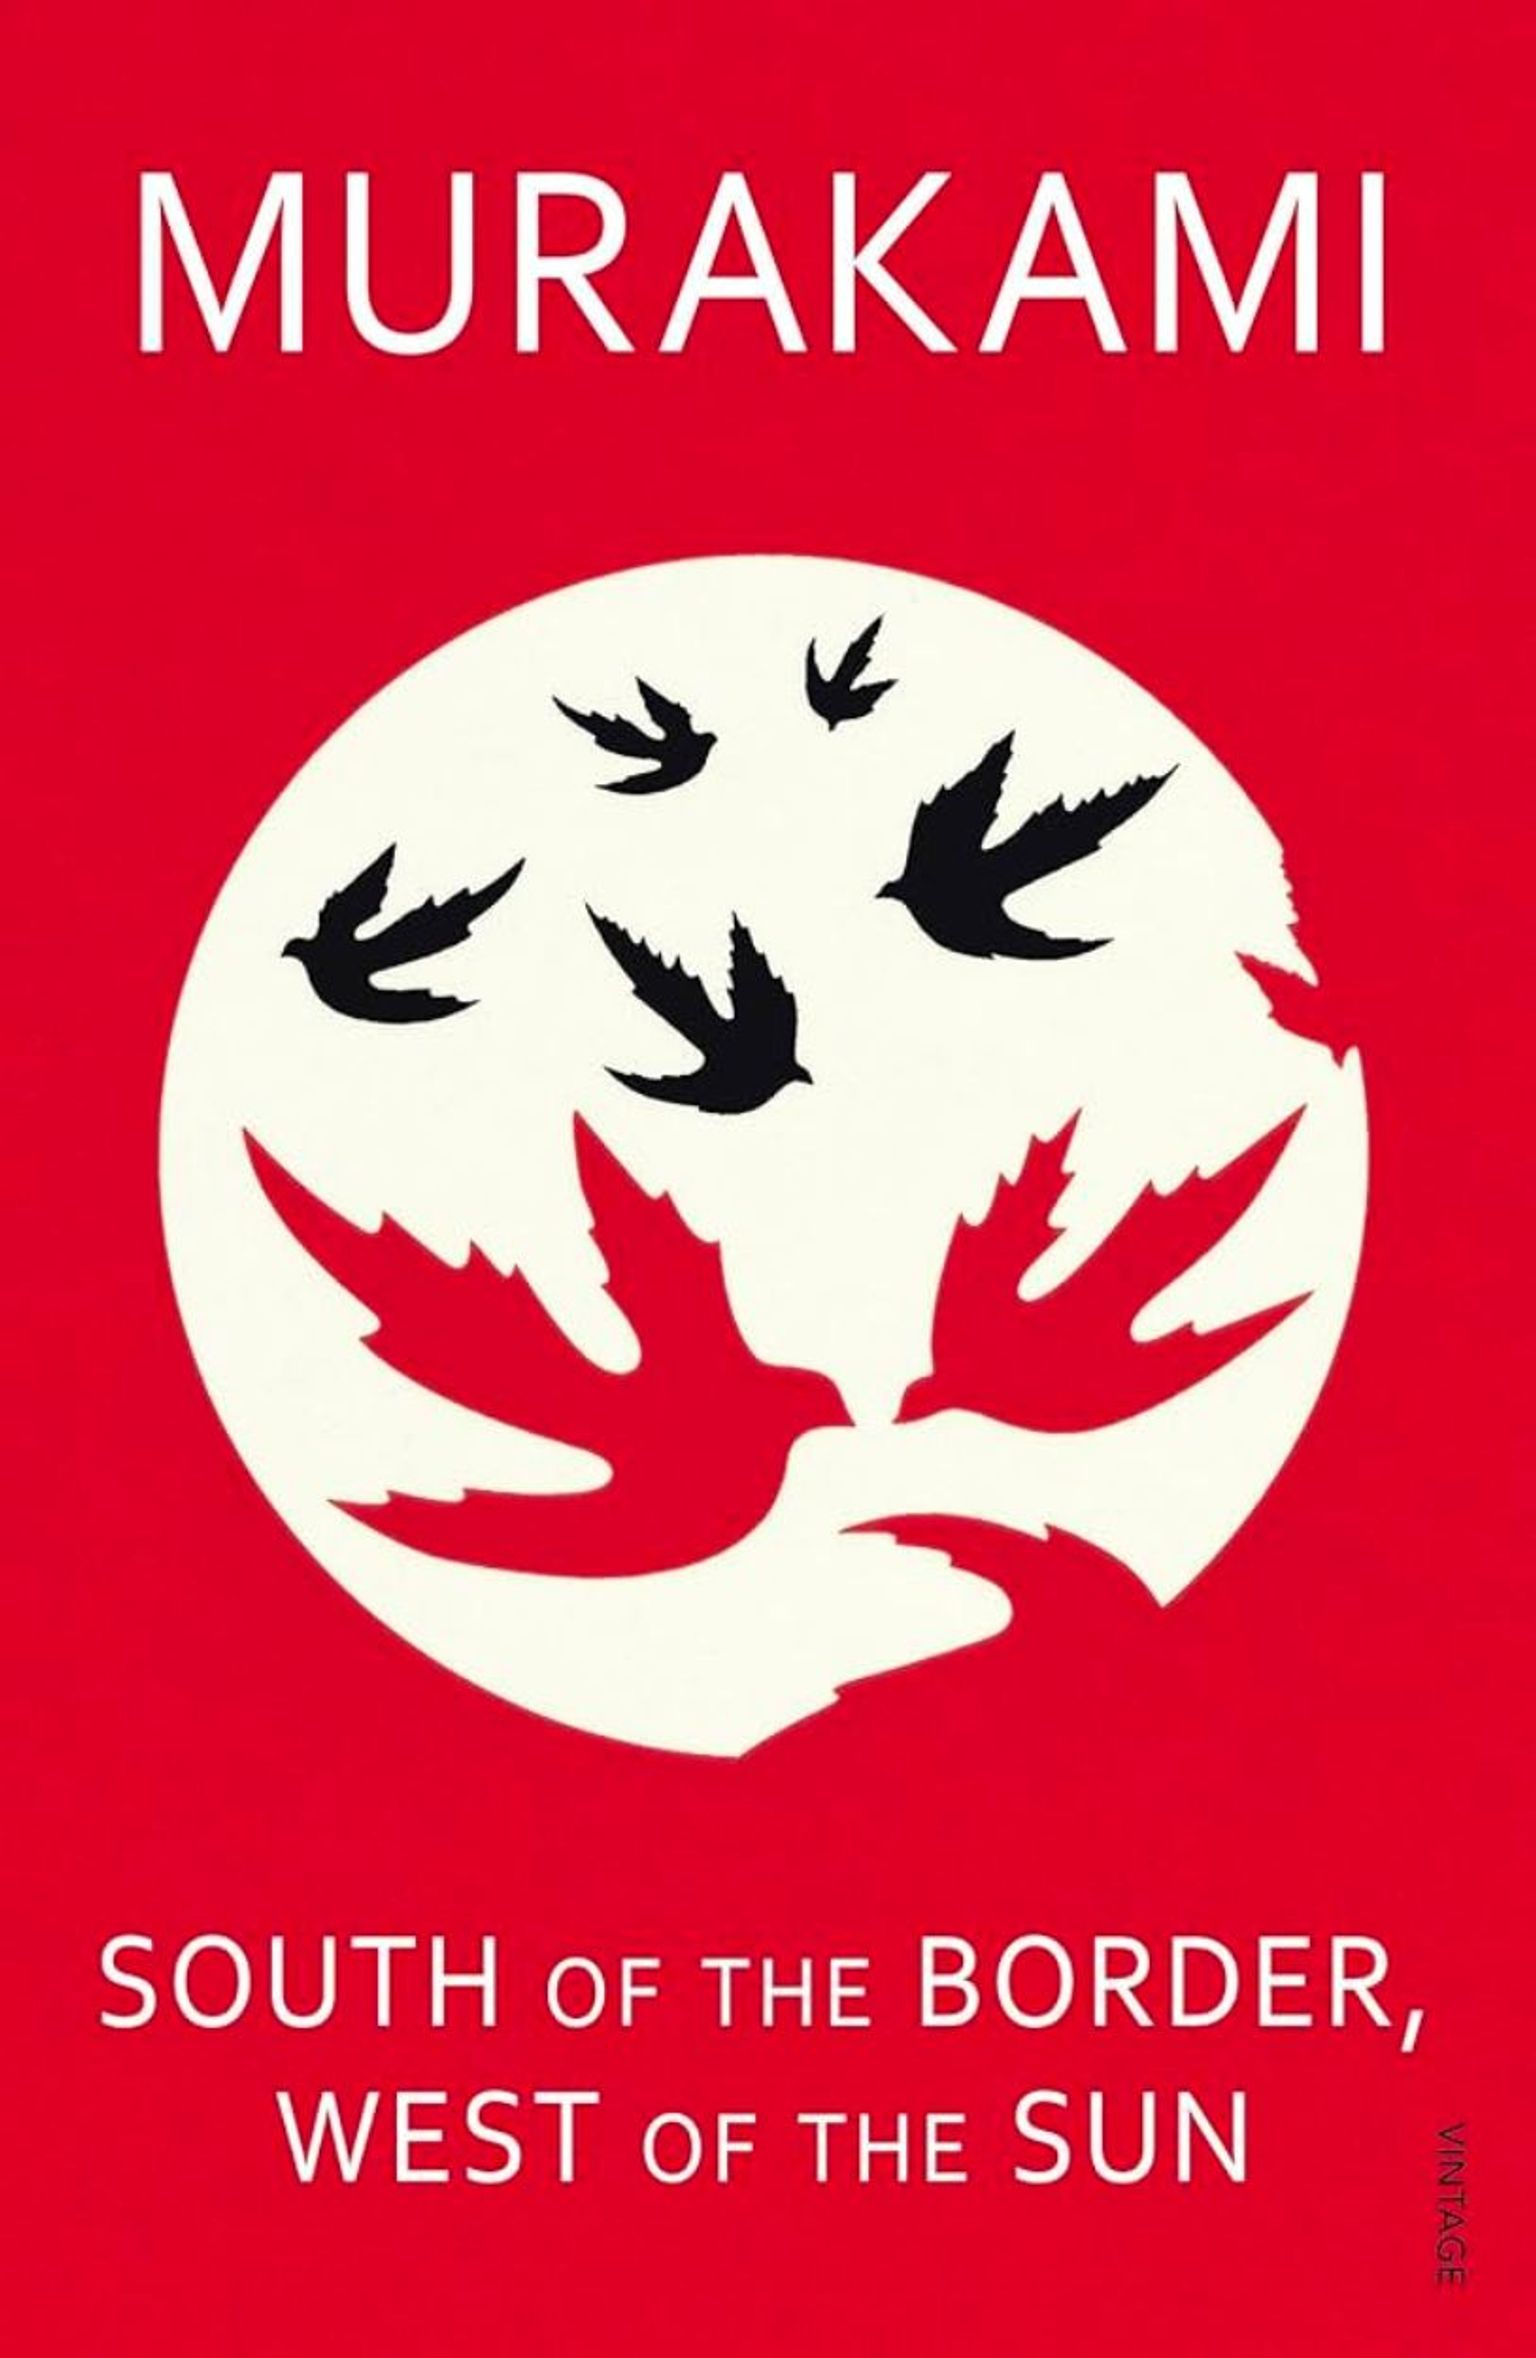 Book Recommendations - South of the Border, West of the Sun